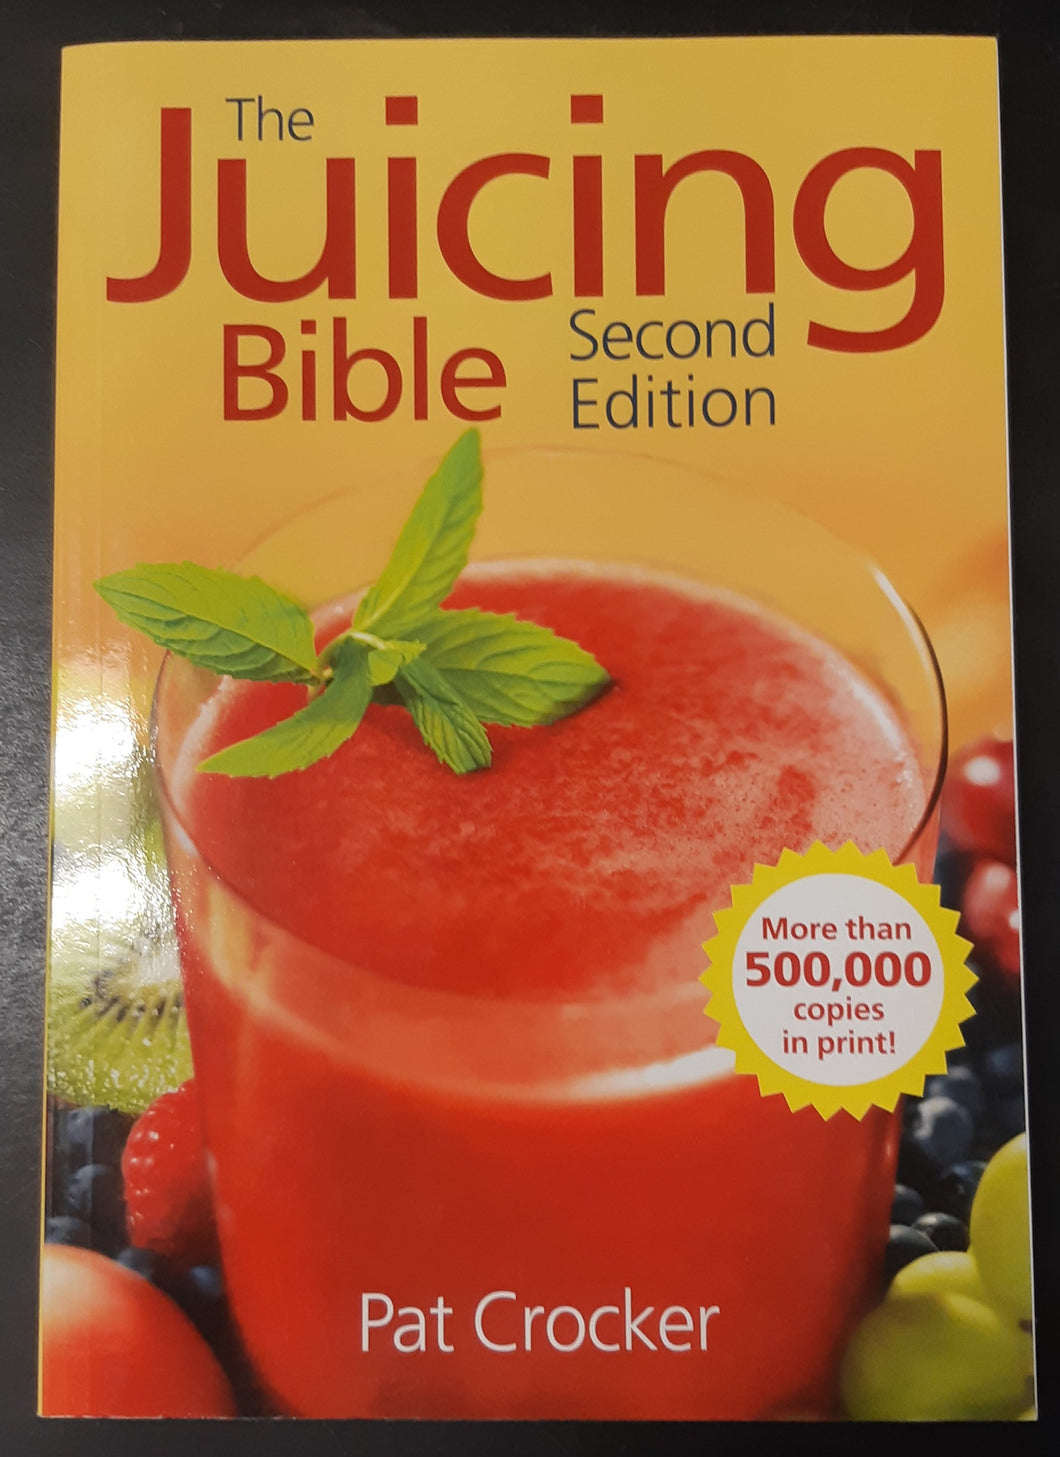 The Juicing Bible: Second Edition by Pat Crocker